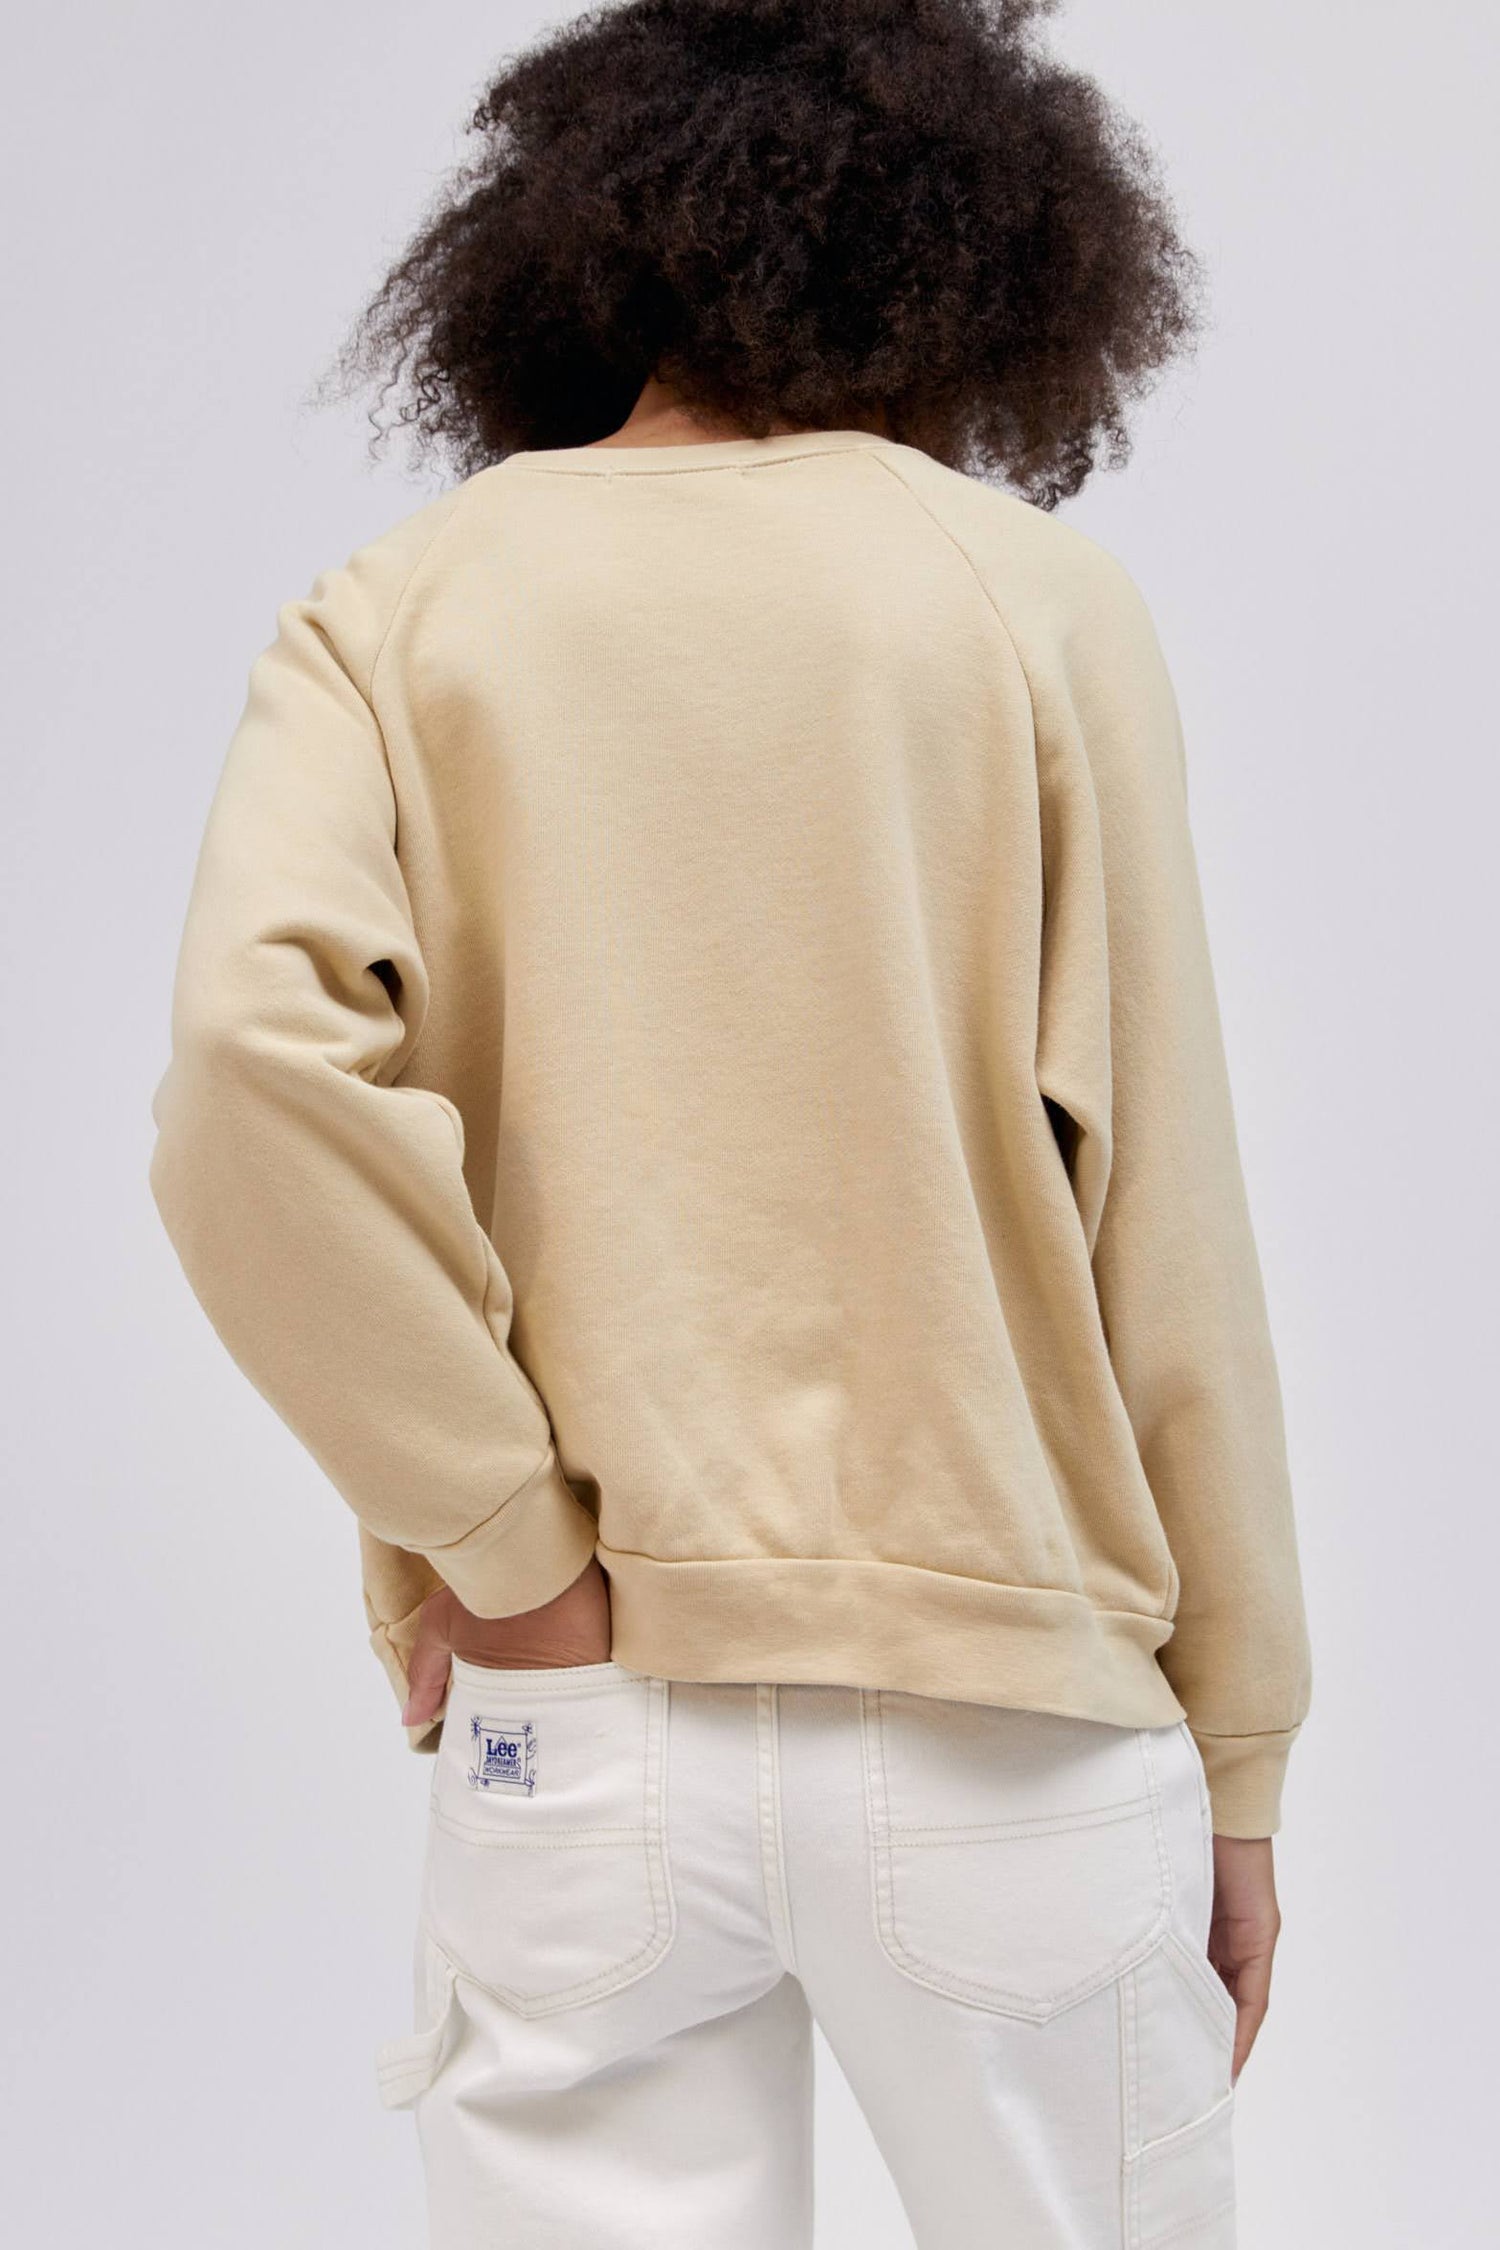 backside of curly haired model with hand in back left pocket wearing a khaki colored sweatshirt